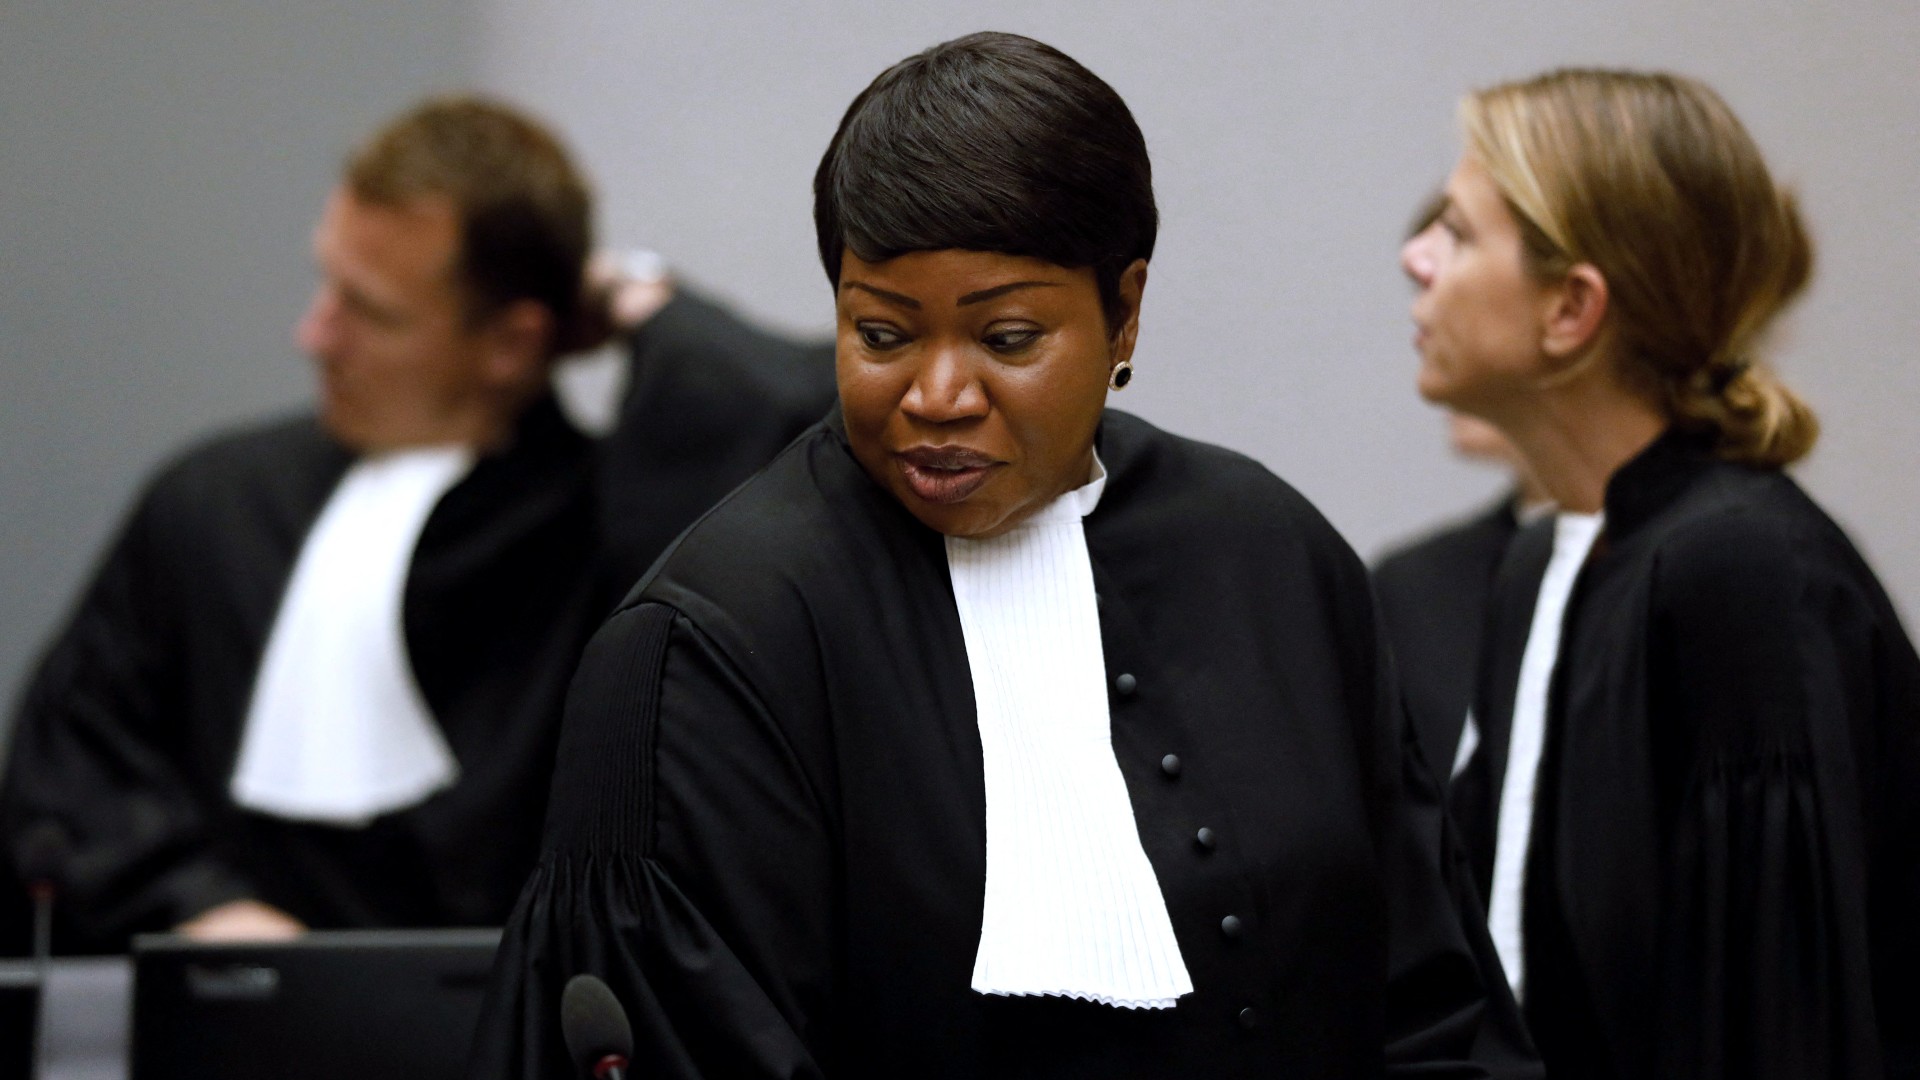 International Criminal Court (ICC) chief prosecutor Fatou Bensouda (C) sits at the courtroom of the International Criminal Court (ICC)